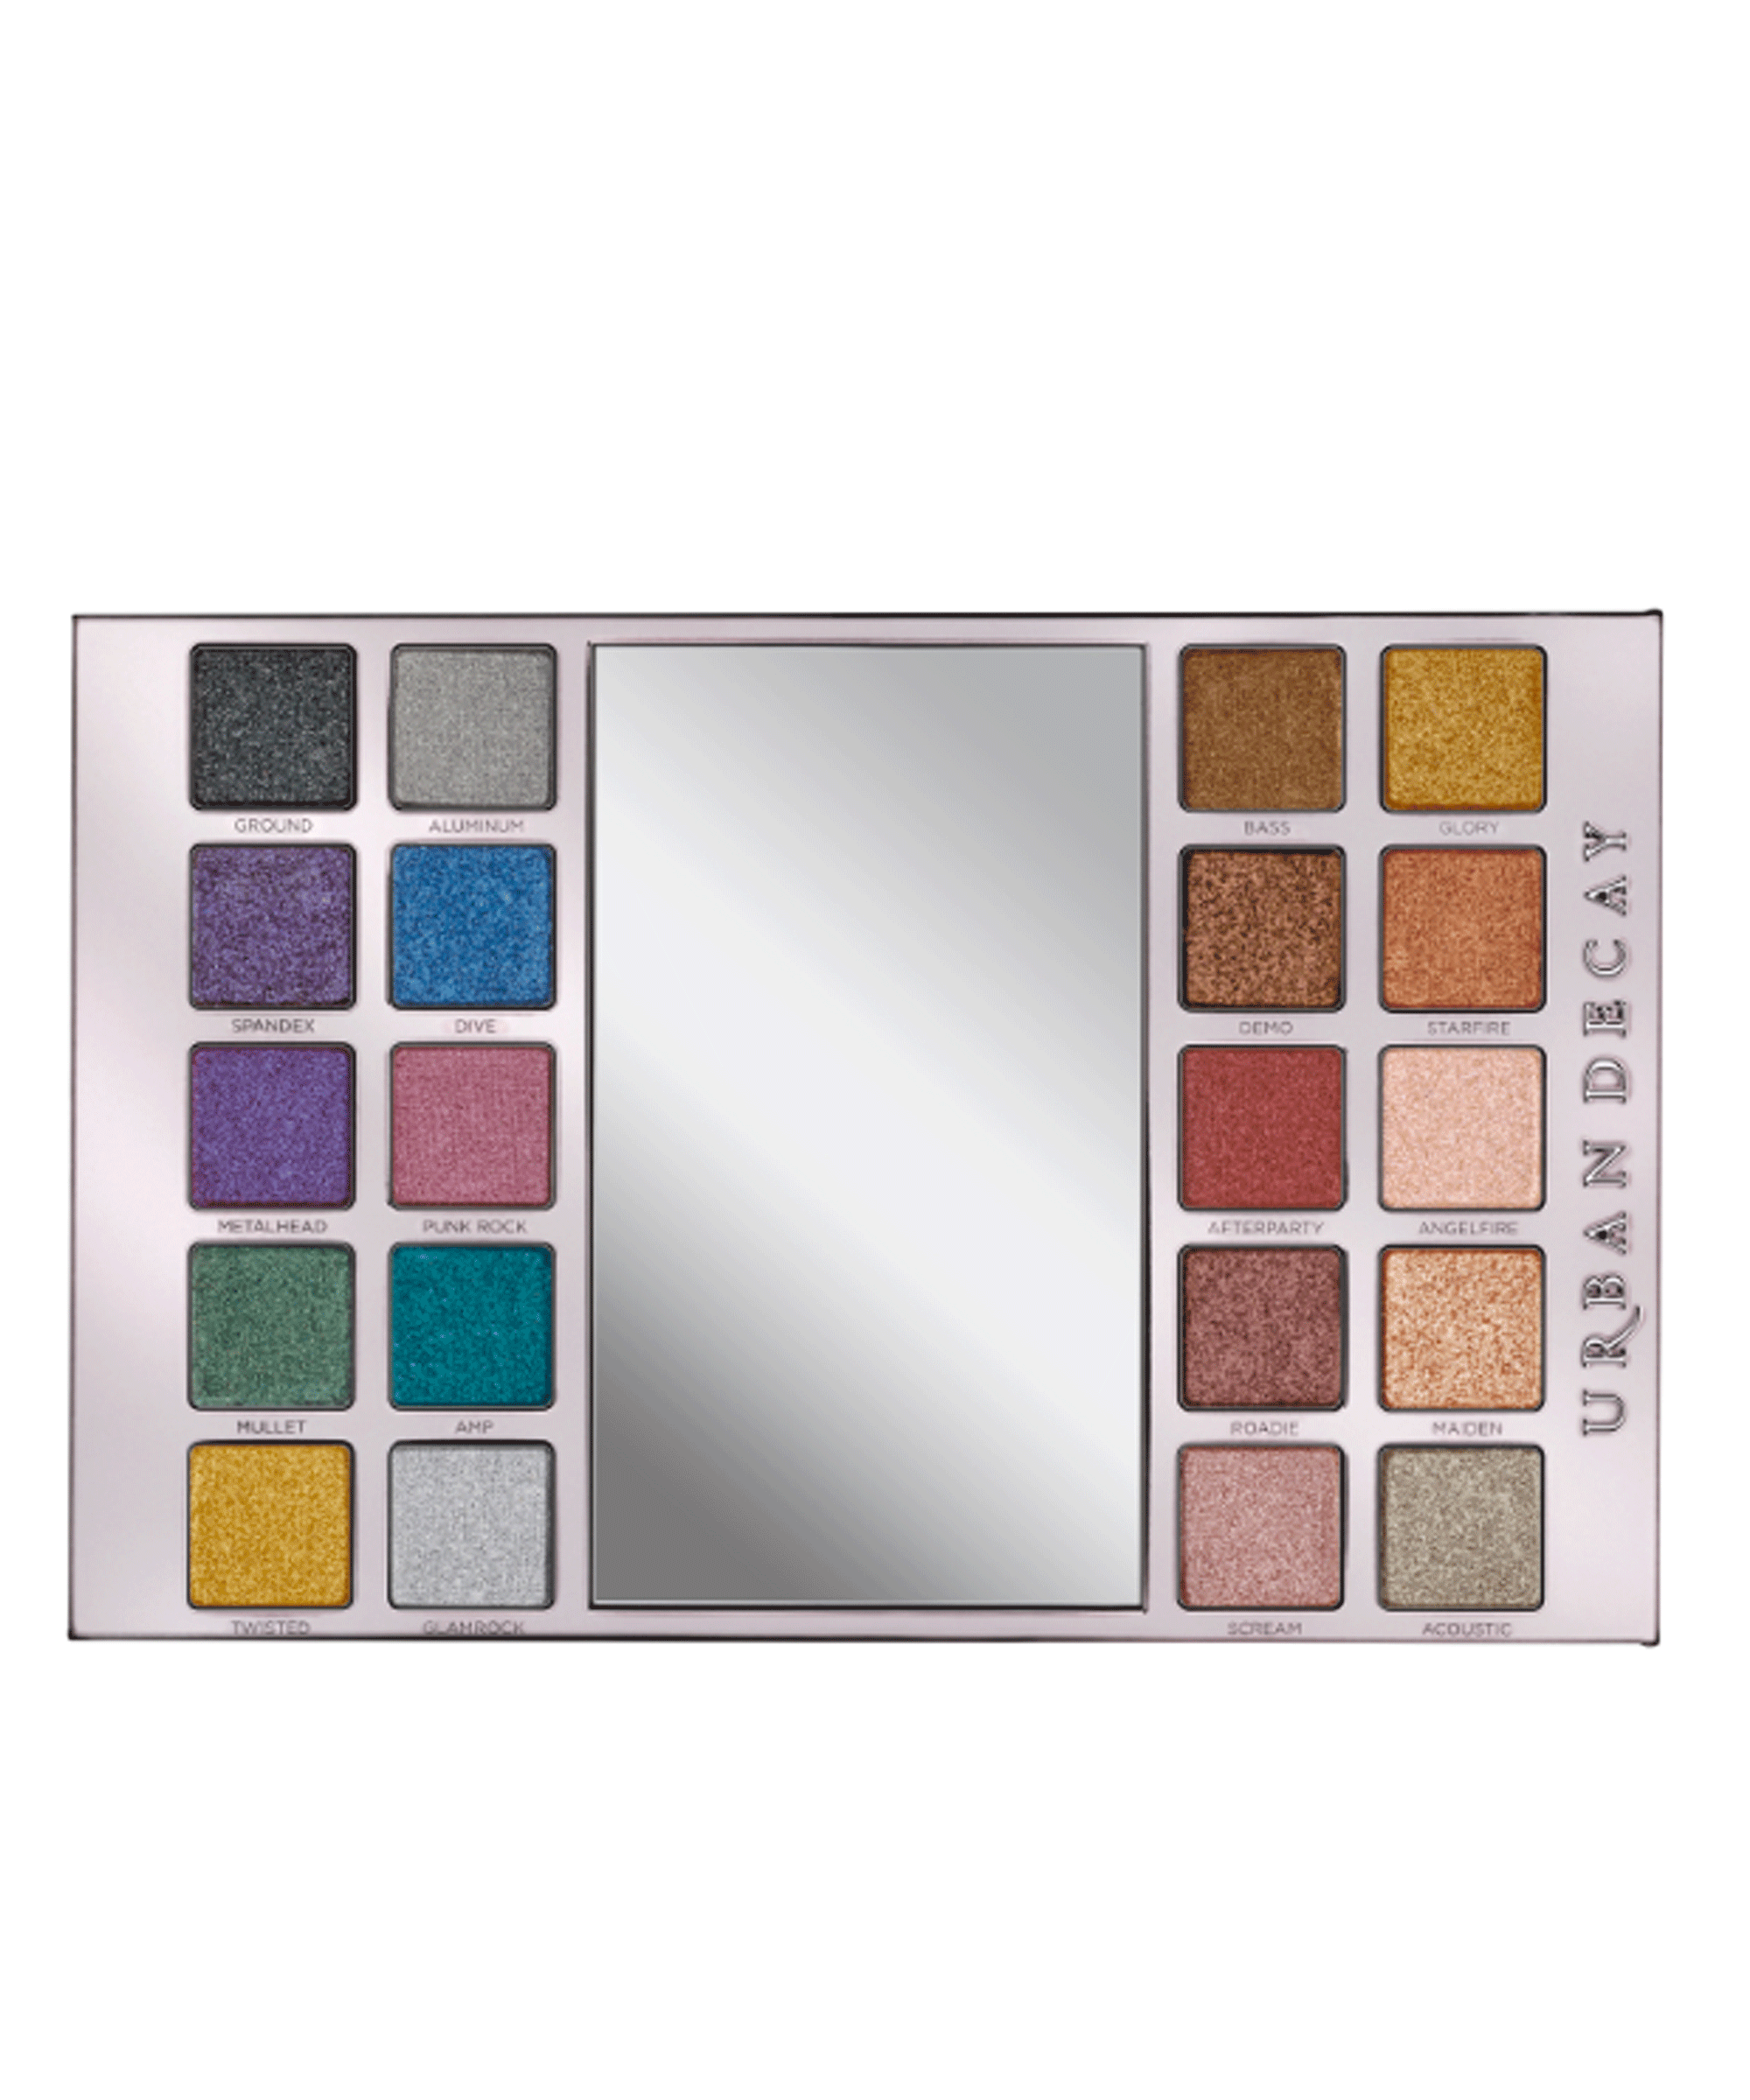 your first look at urban decay’s heavy metals palette